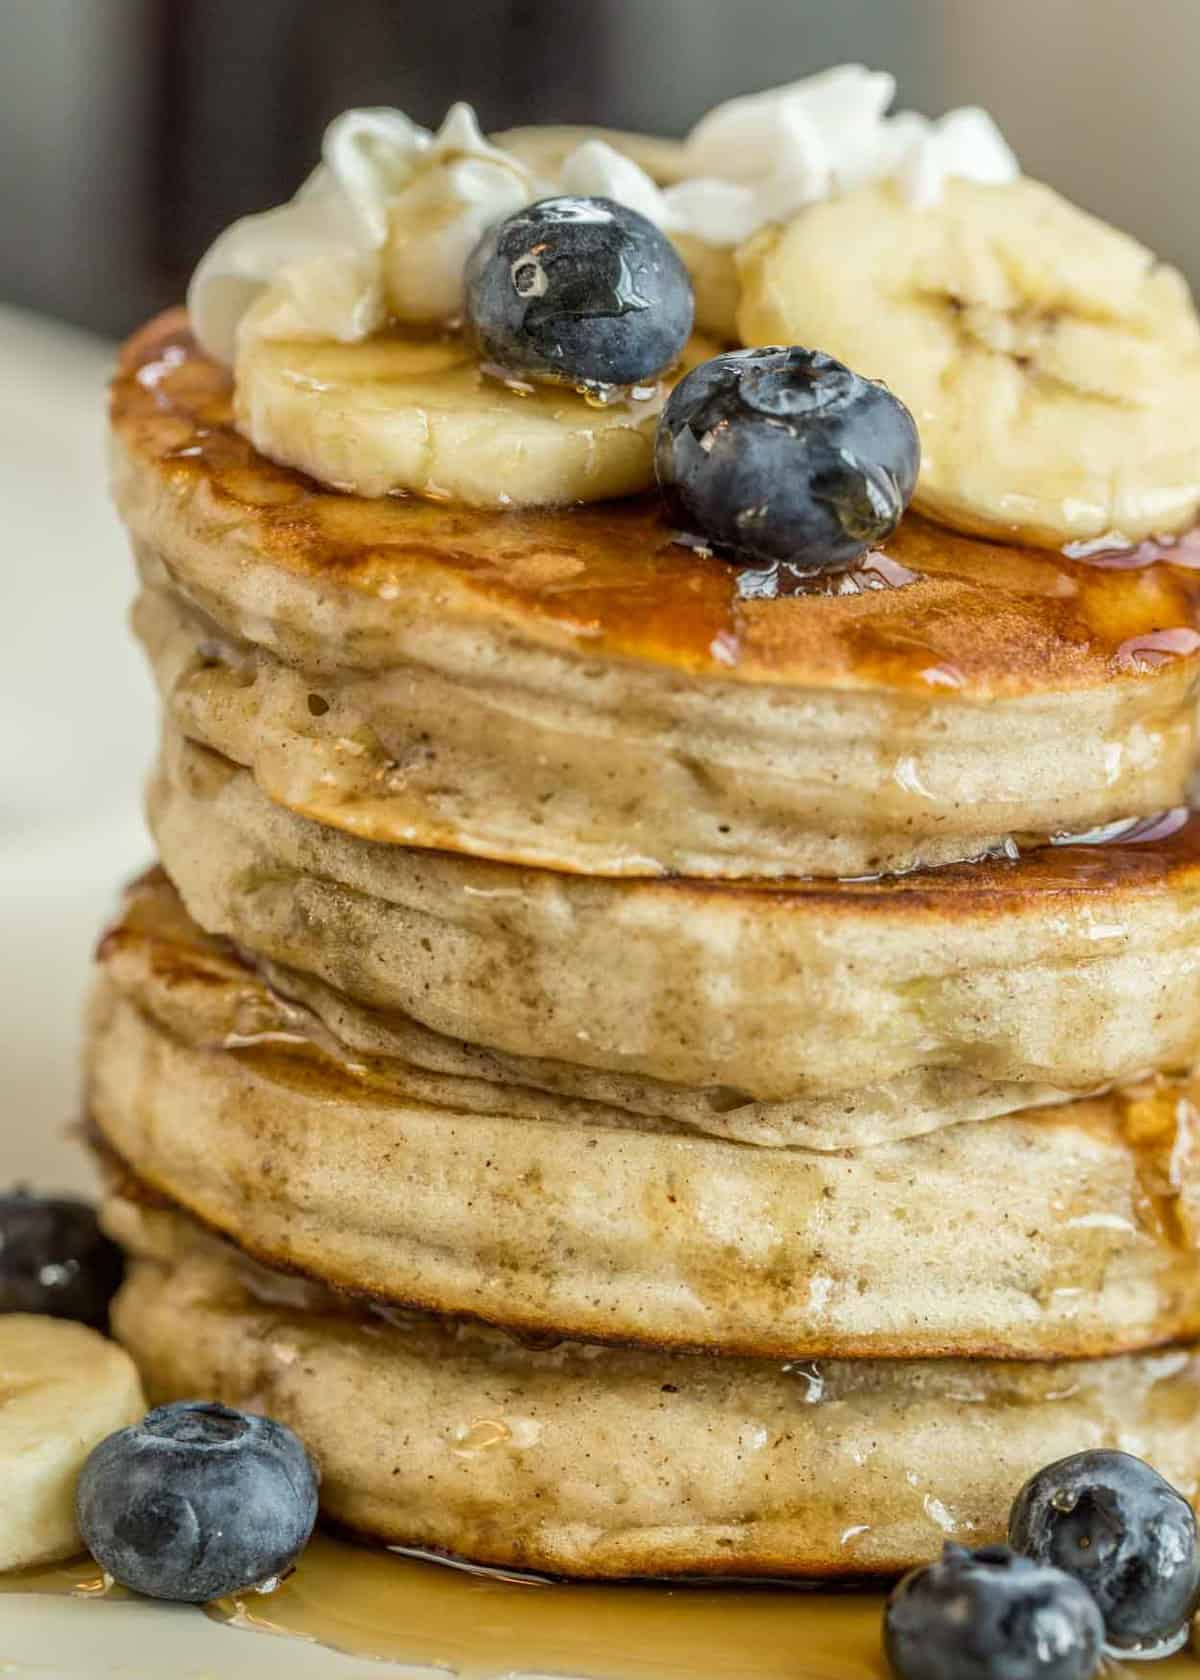 Banana pancakes stacked on top of each other with fresh bananas, blueberries, whipped cream and syrup.